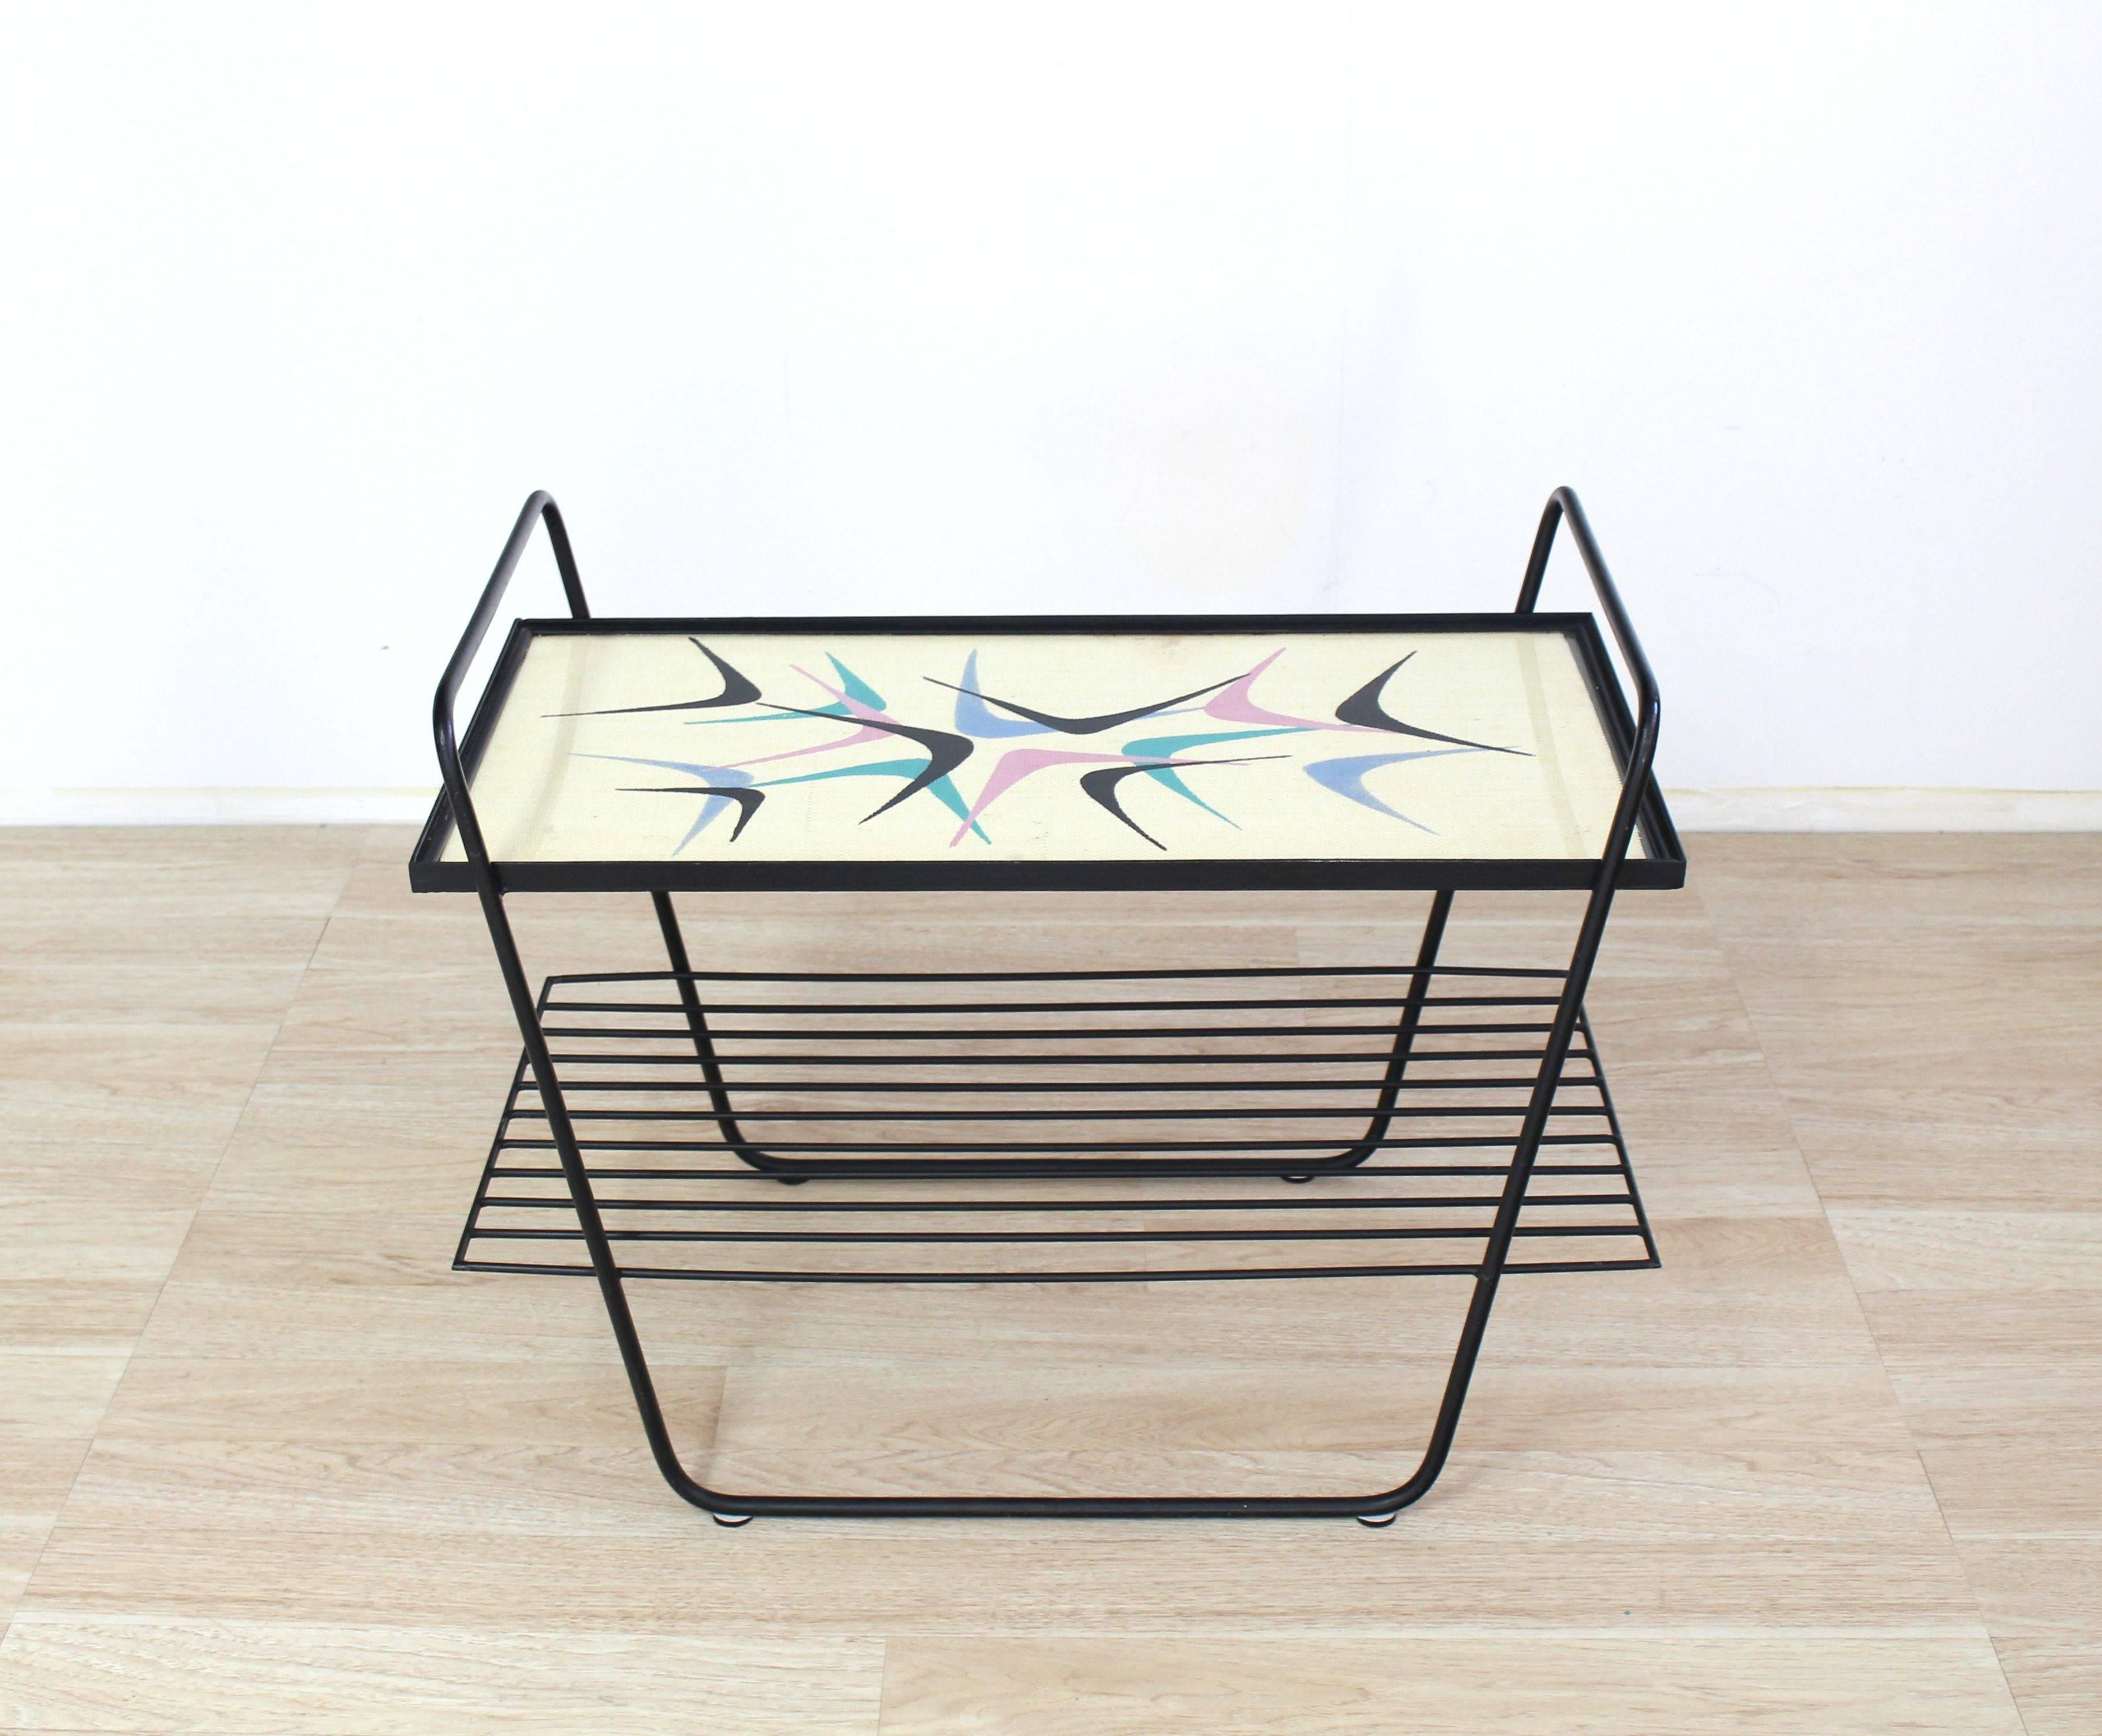 Rectangular Mid-Century Modern serving tray side end table. Wire design with printed cloth modern pattern top covered with glass.